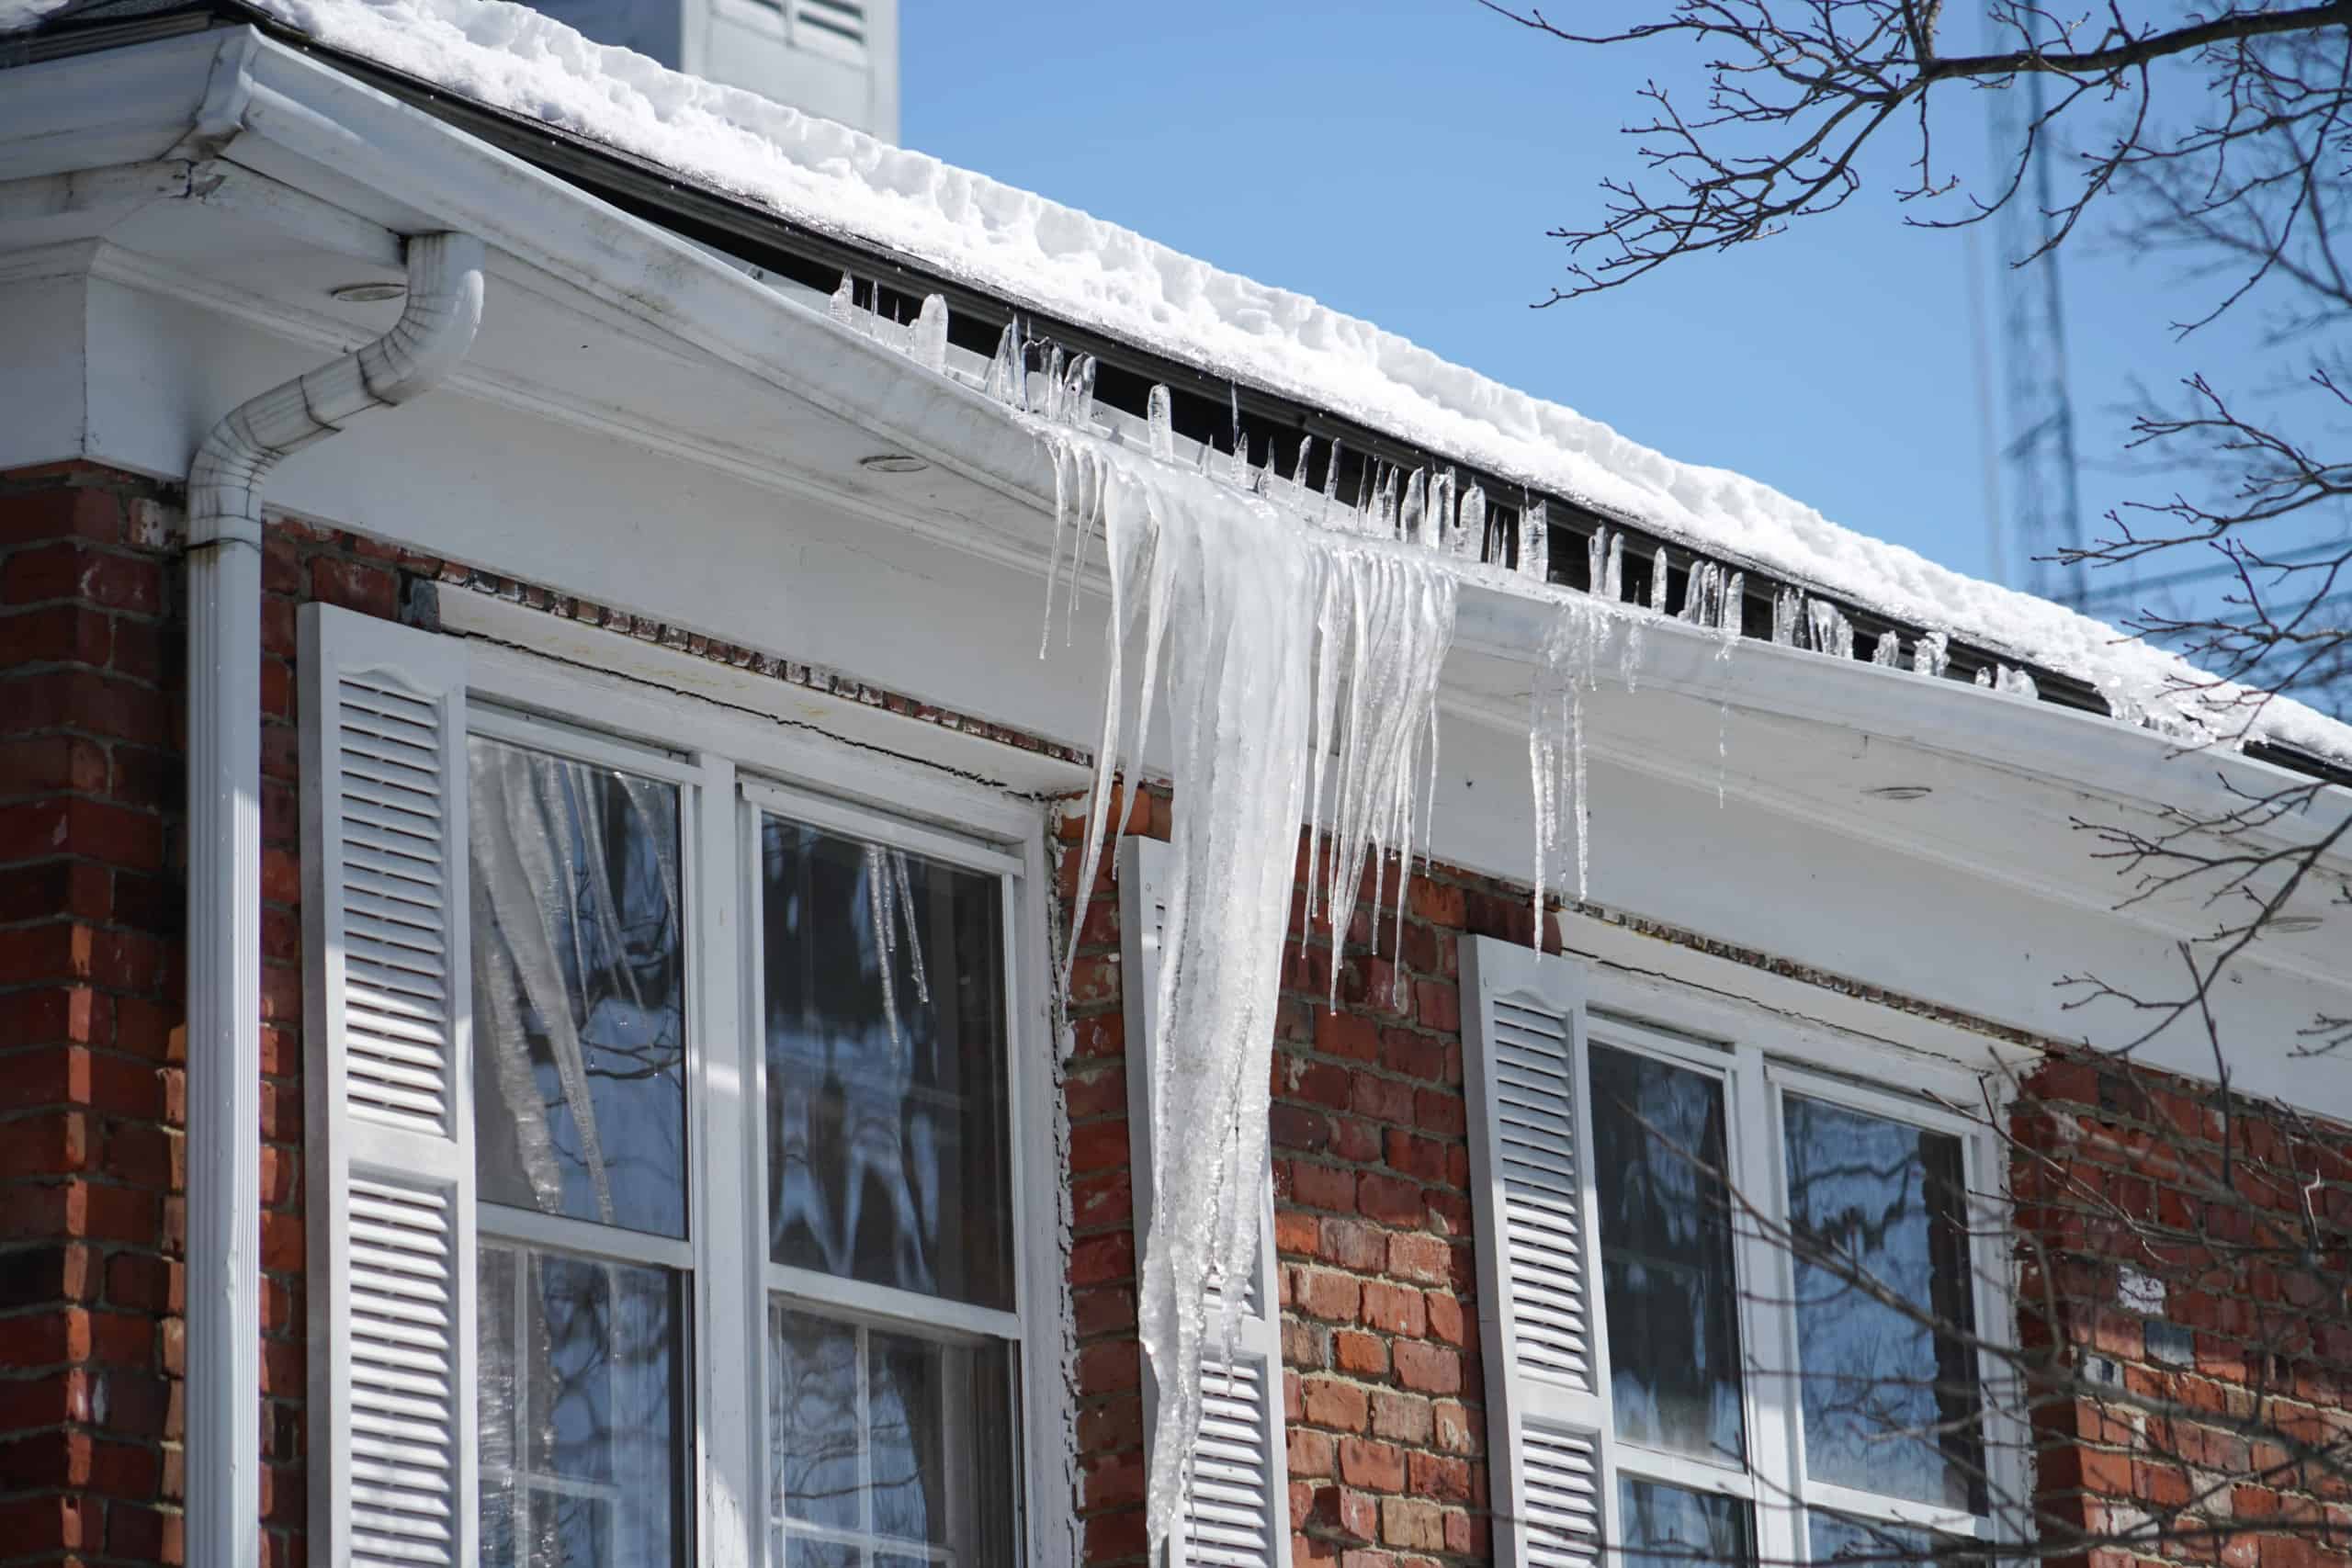 House with poor ventilation with icicles